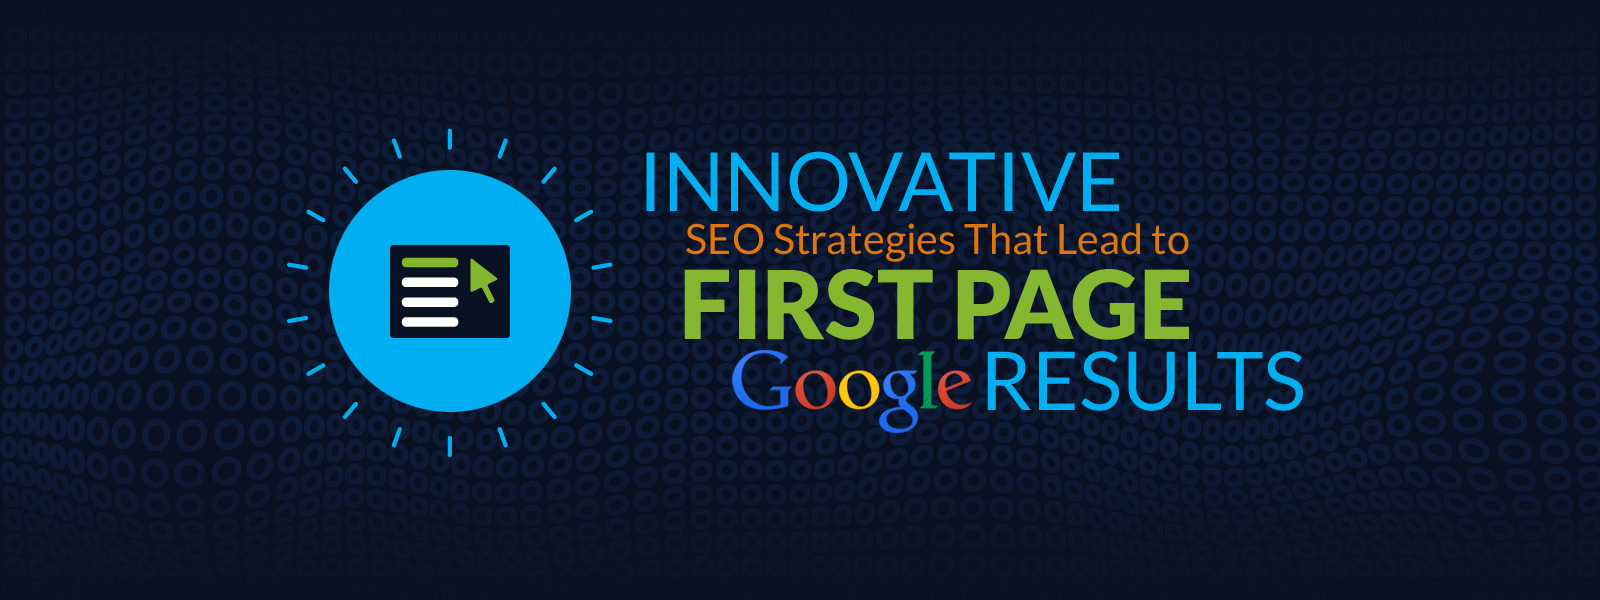 Innovative SEO Strategies for Google First Page